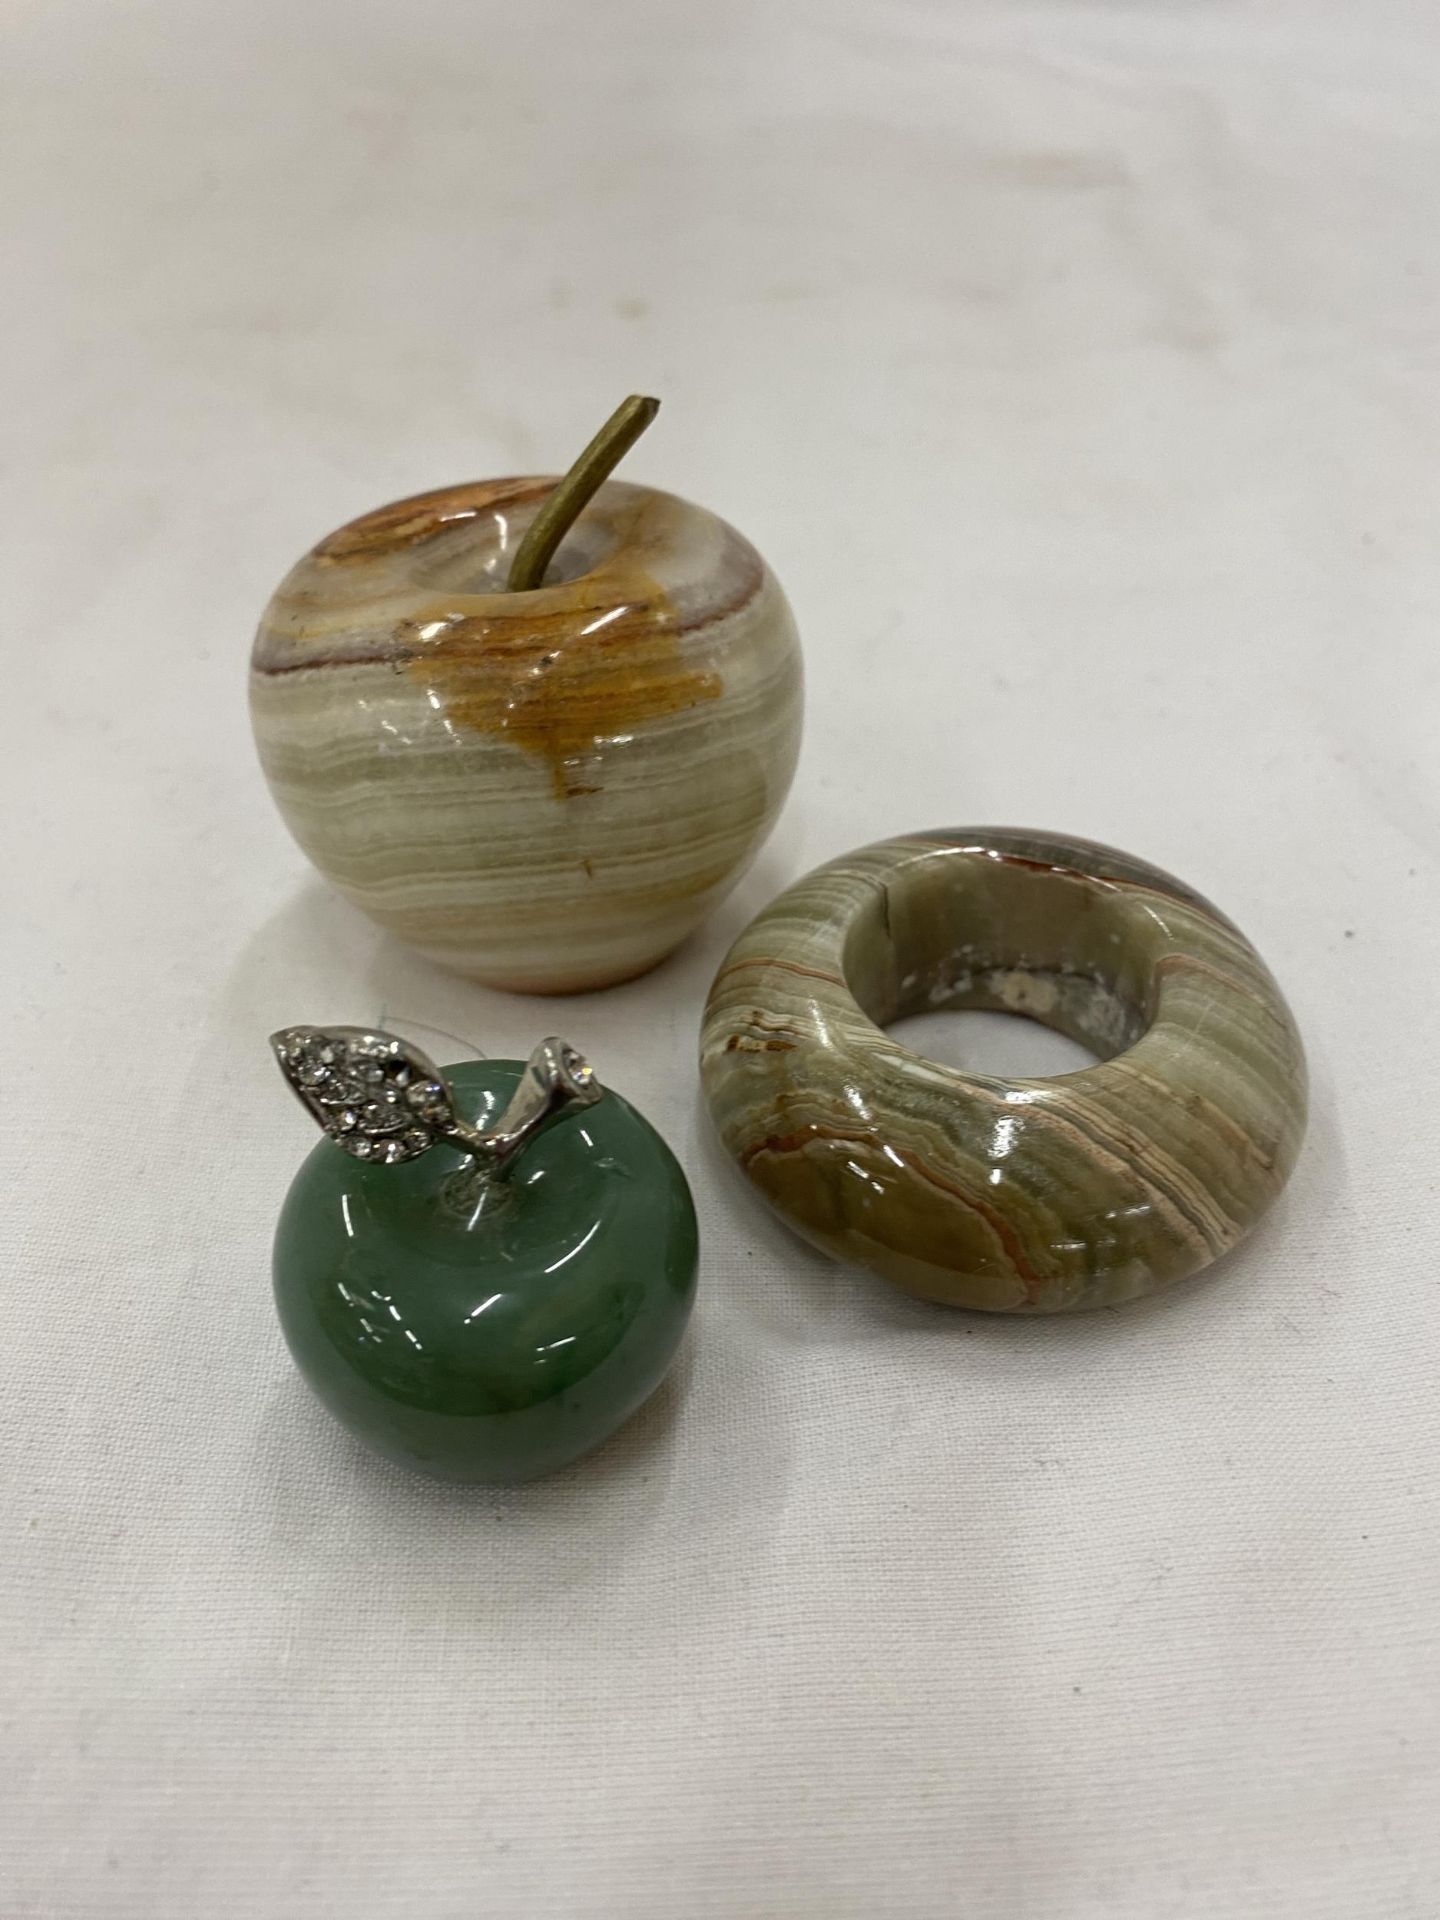 TWO NATURAL ONYX STONE APPLES